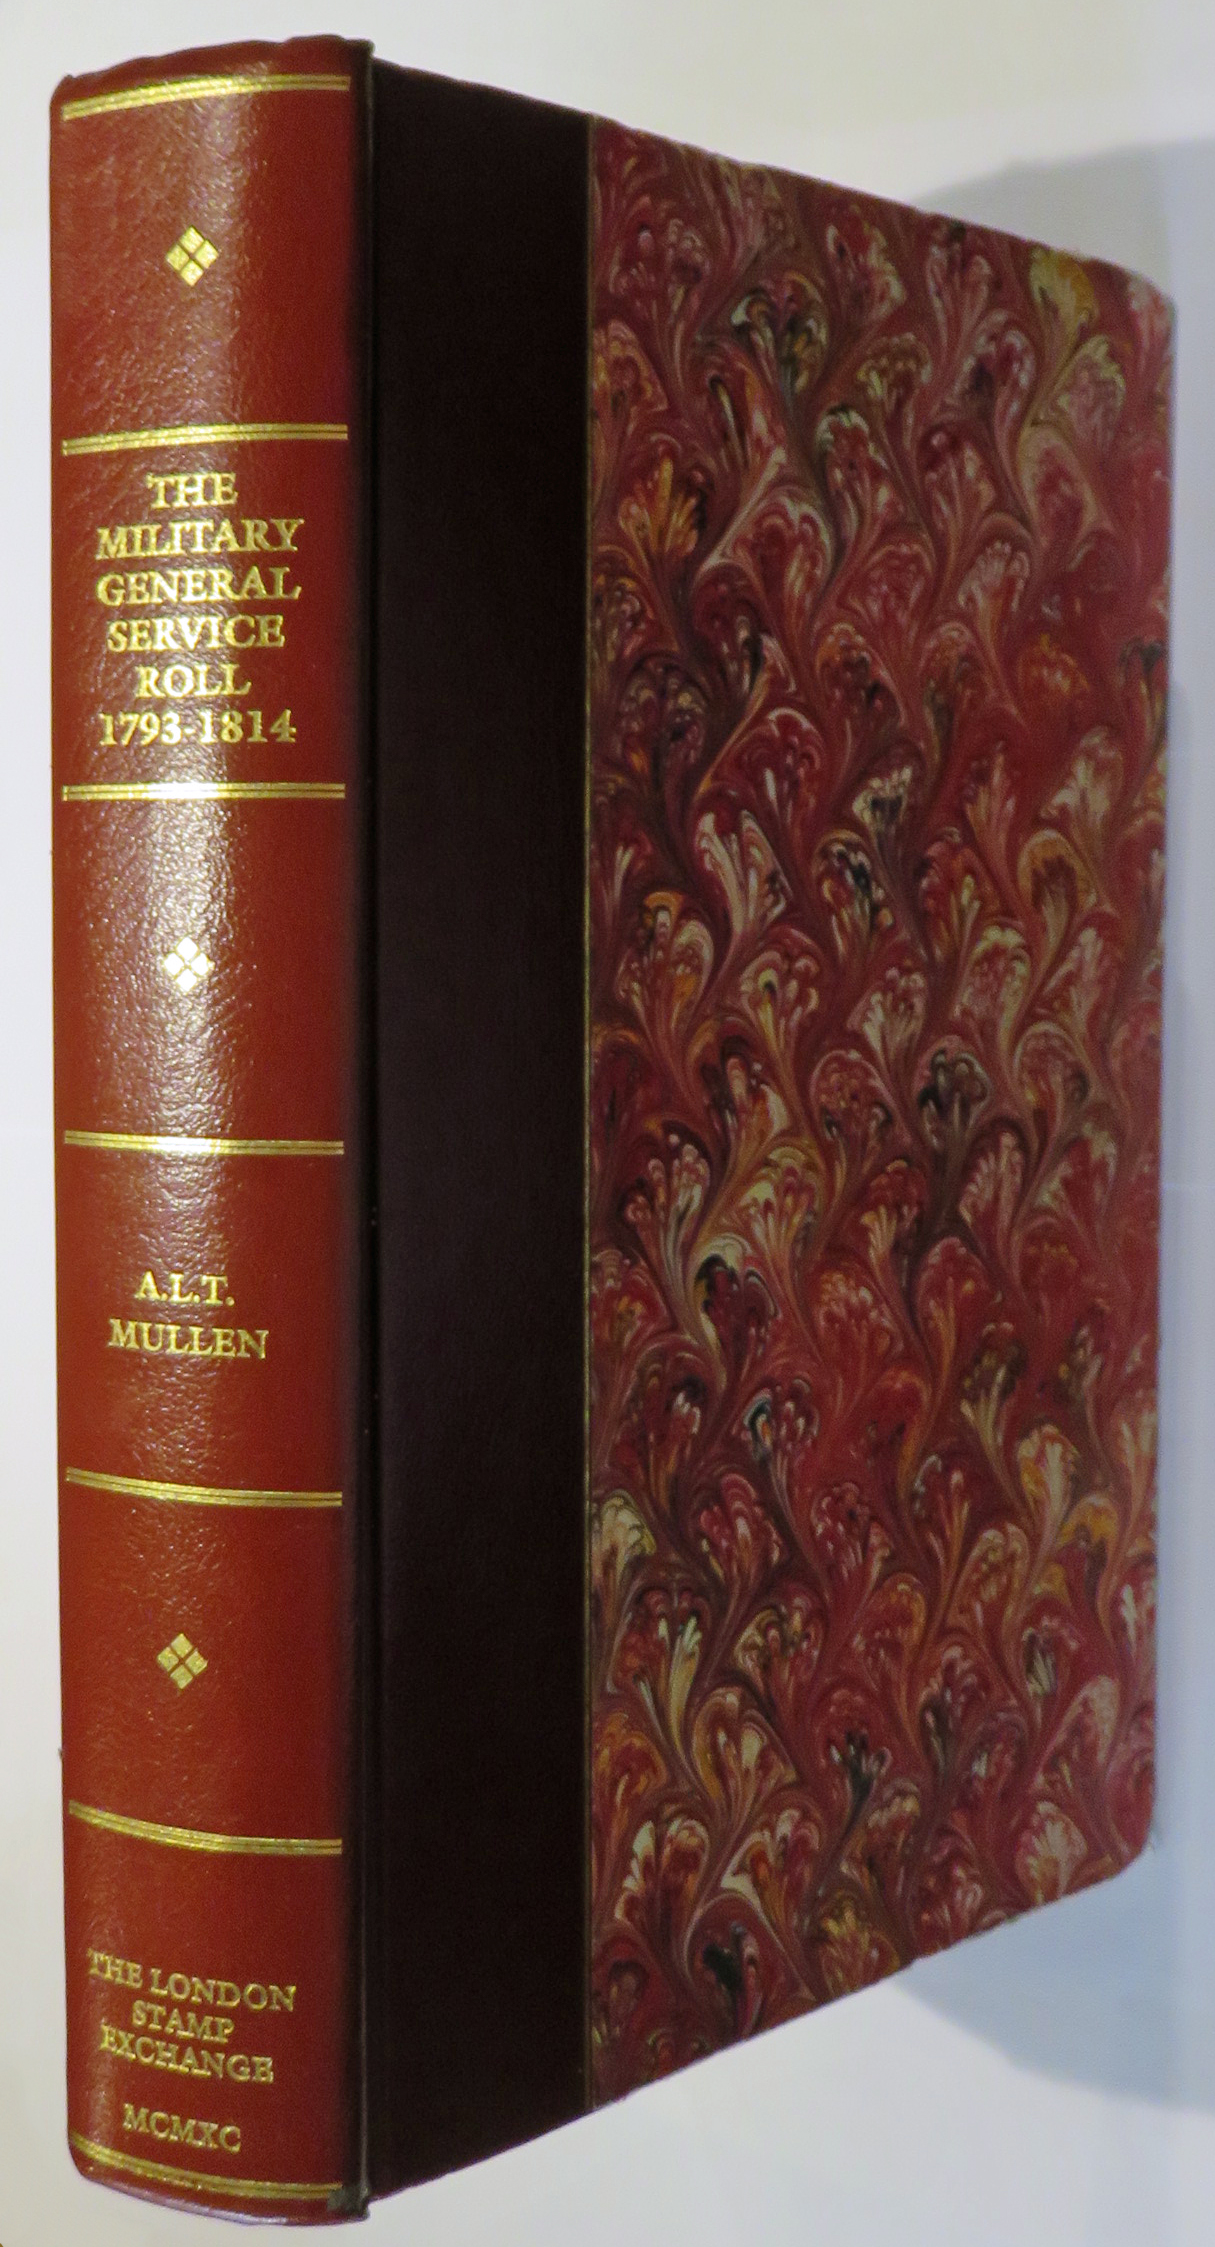 The Military General Service Roll 1793-1814